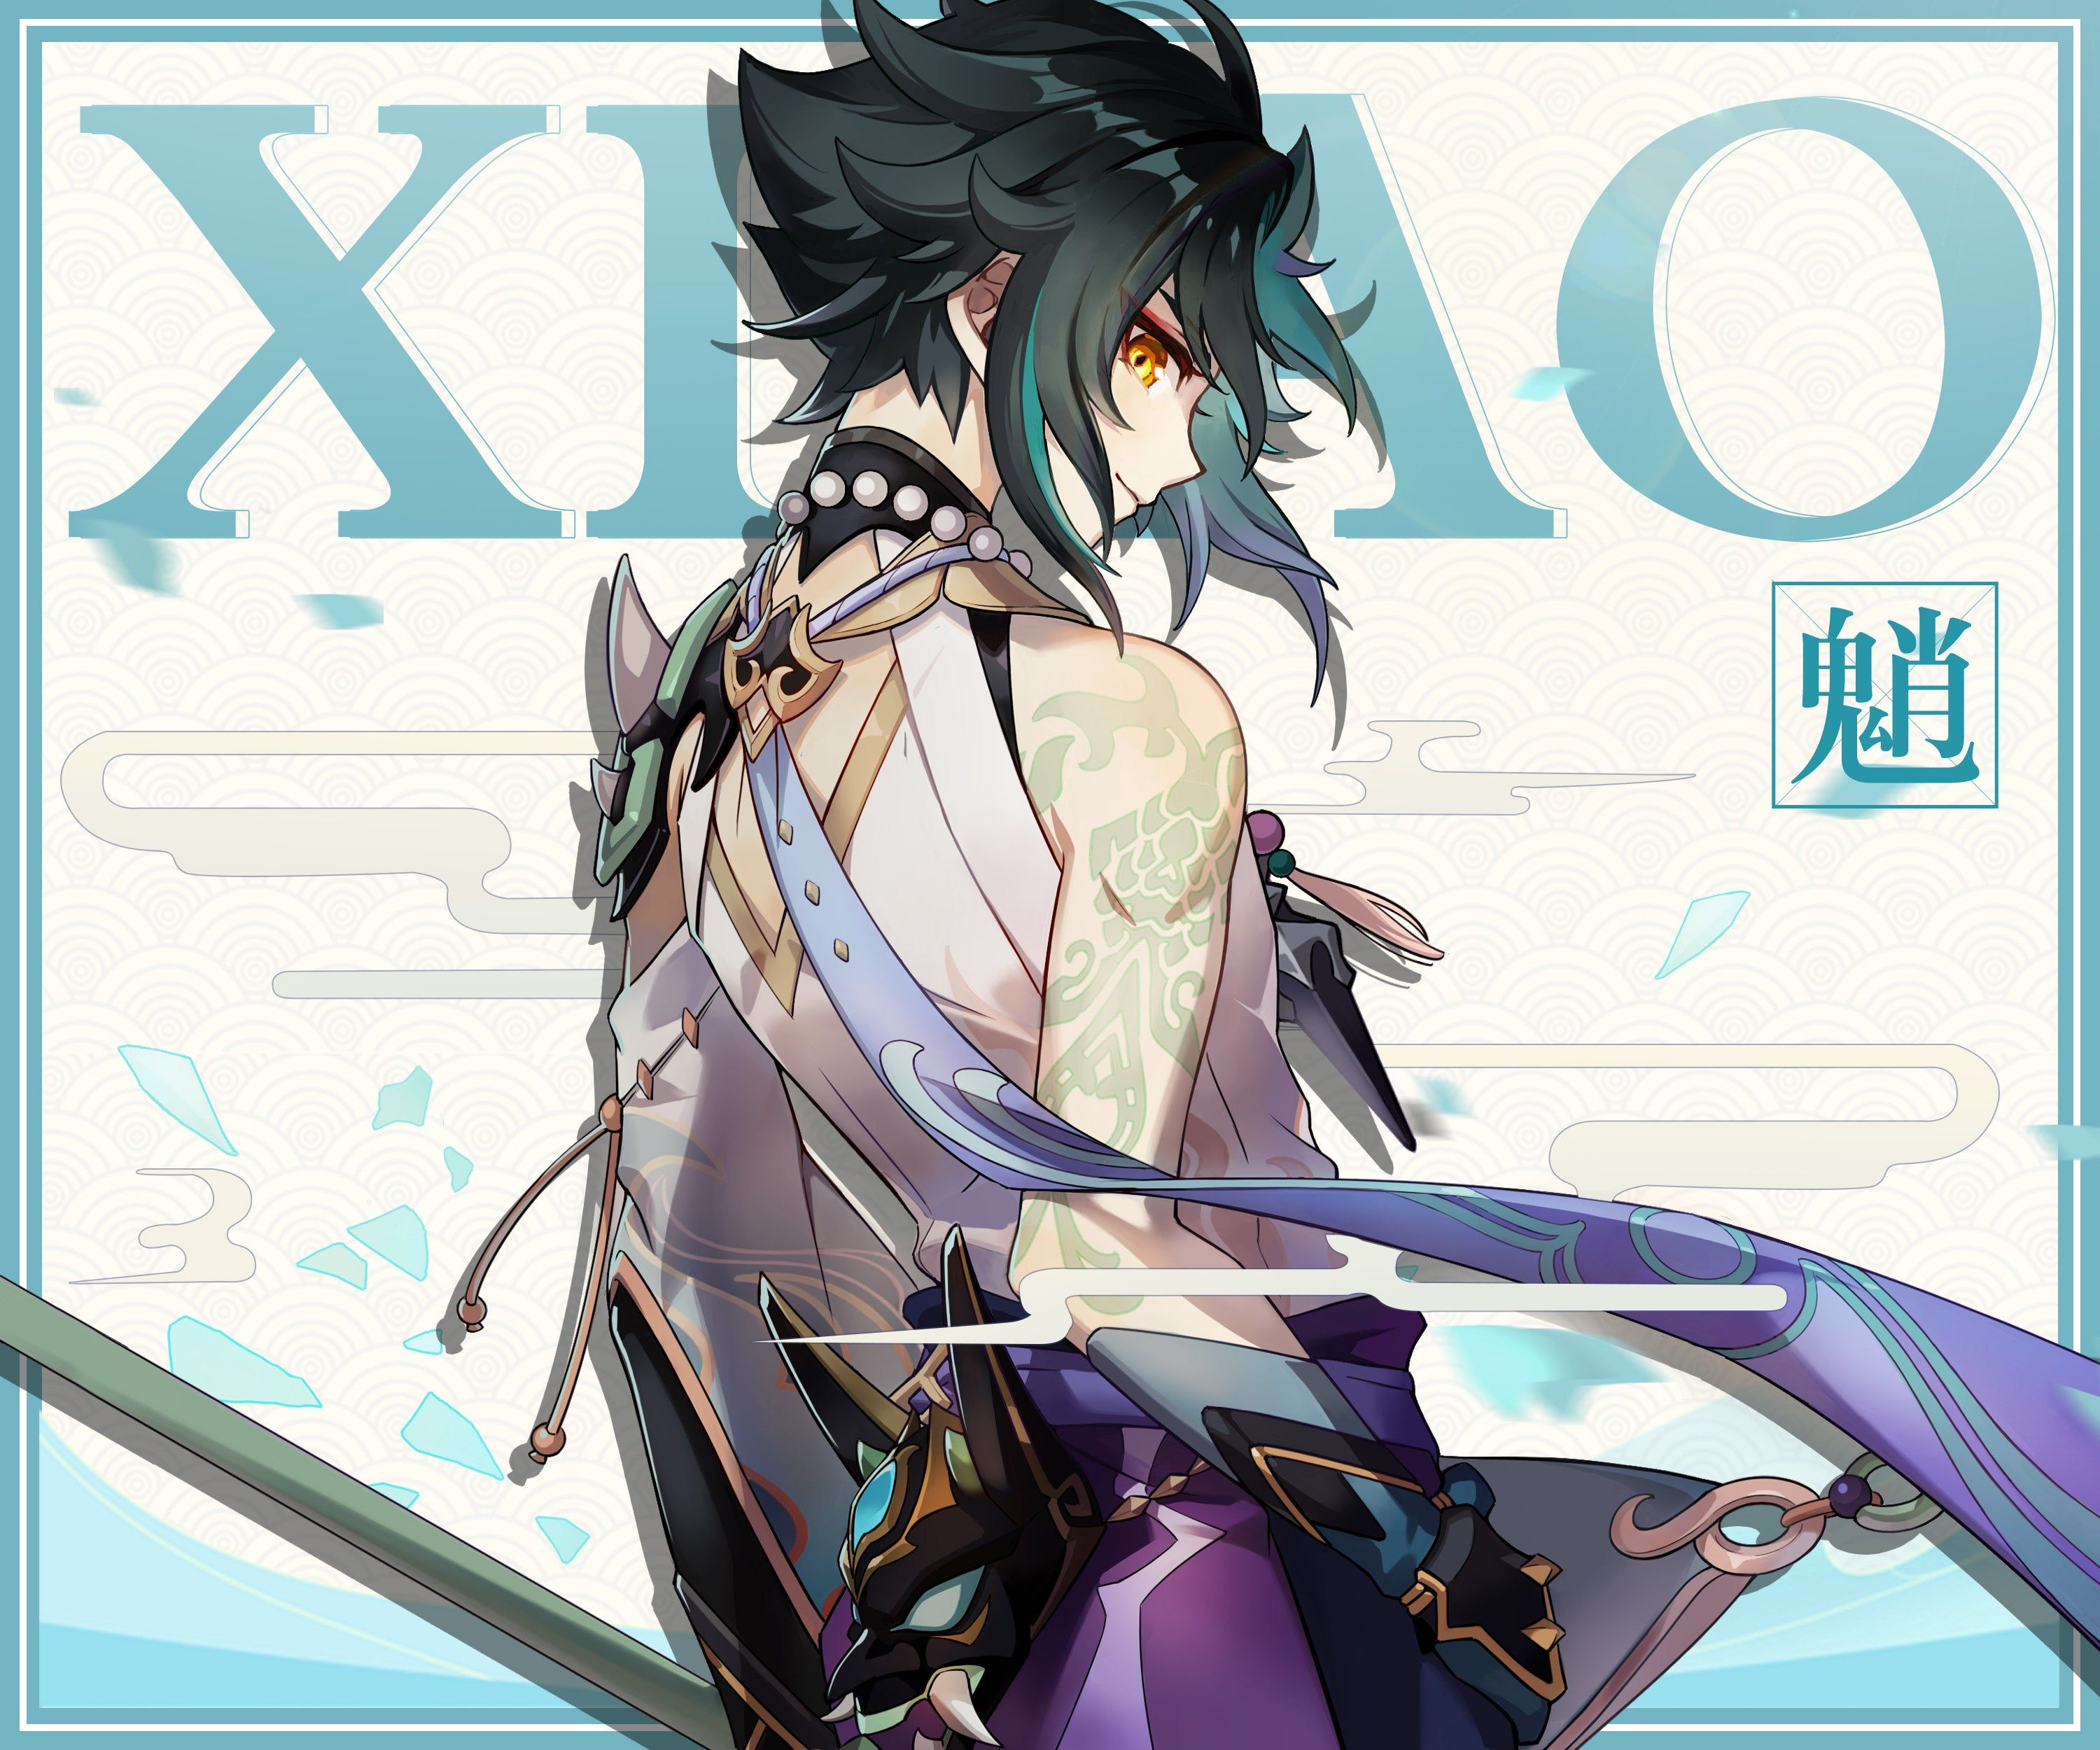 A moment to appreciate Xiao's character art